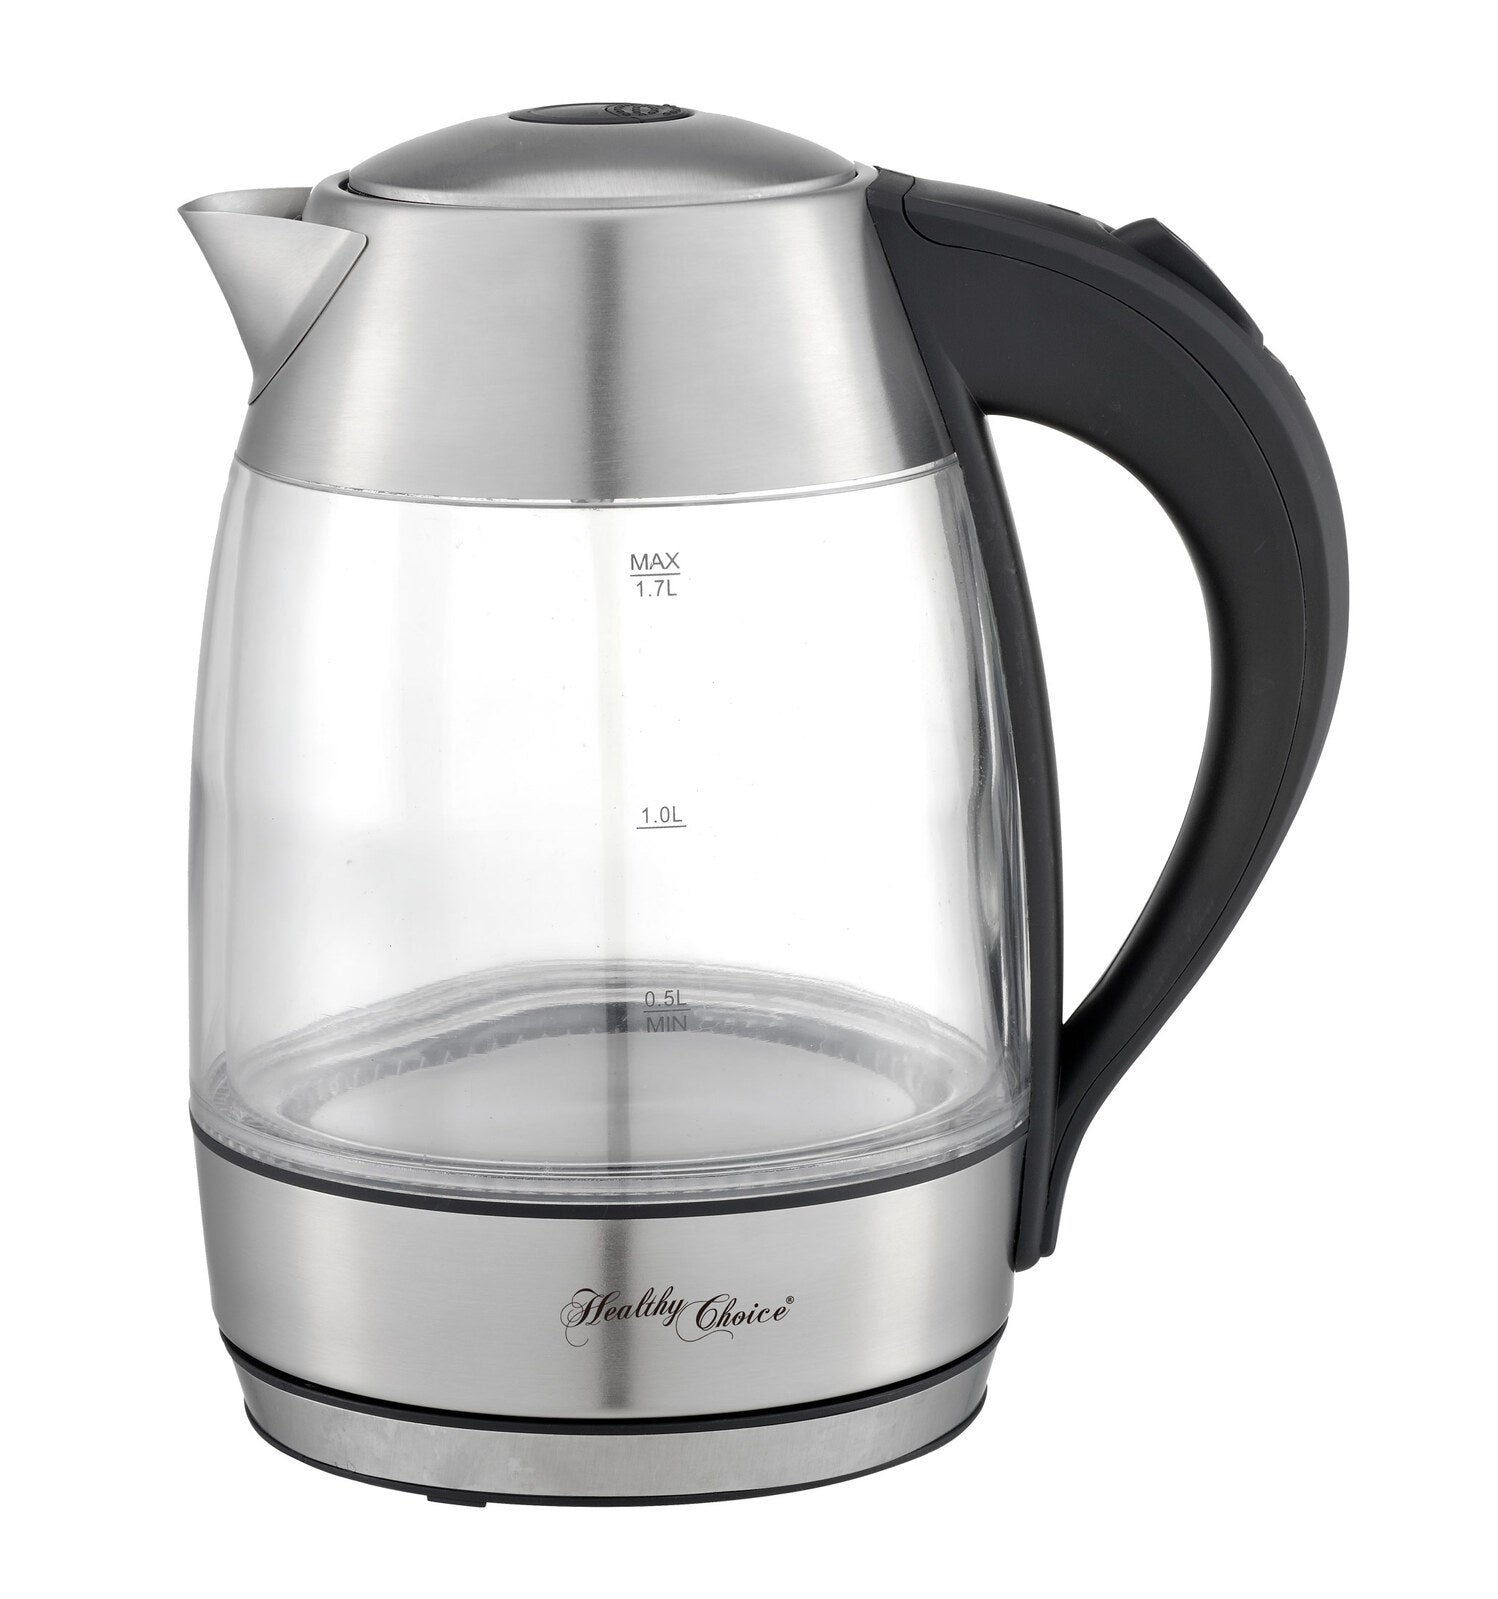 1.7 Litre Glass Kettle with 360 degrees Rotational Base - SILBERSHELL